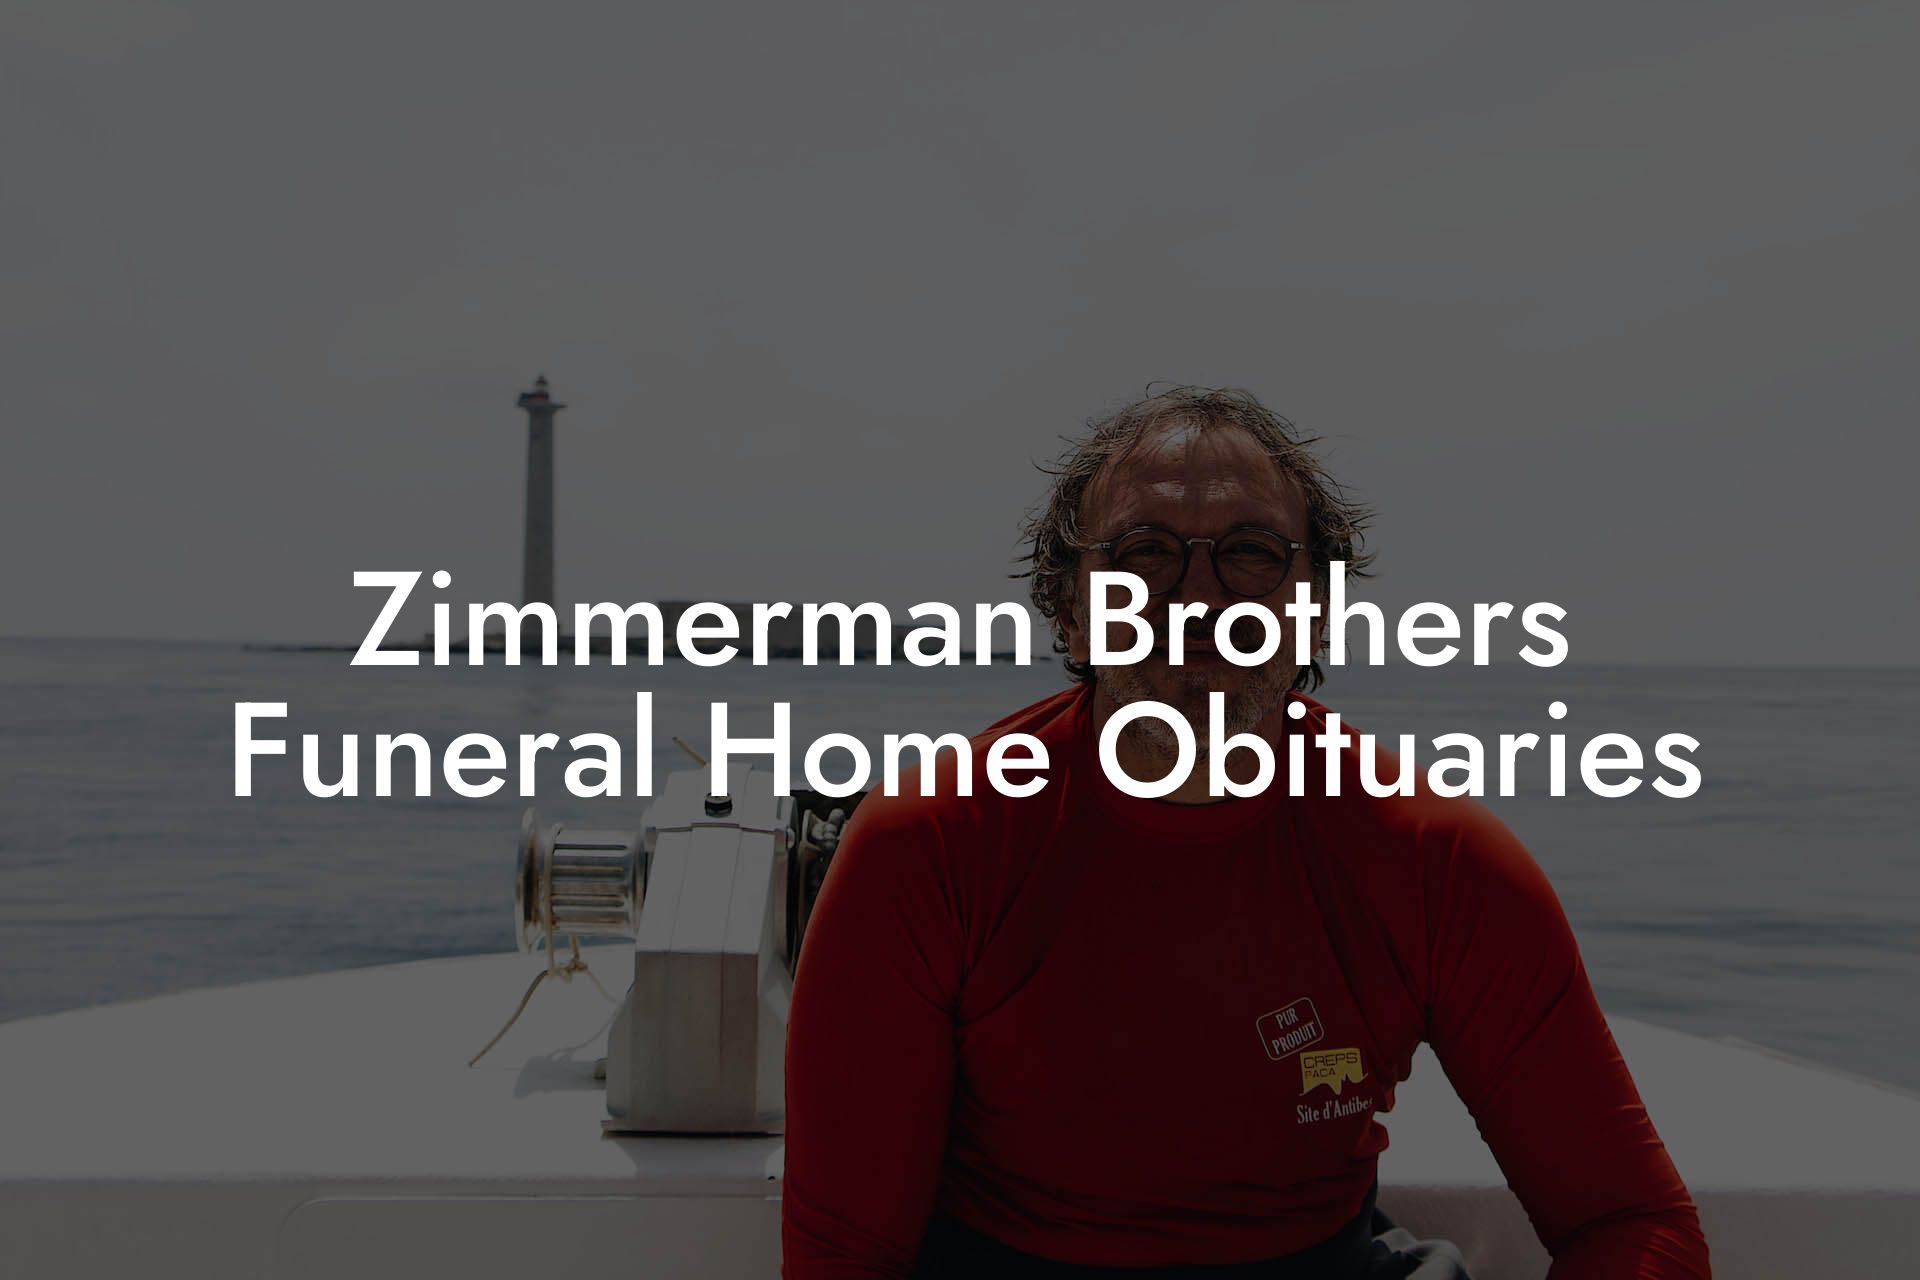 Zimmerman Brothers Funeral Home Obituaries